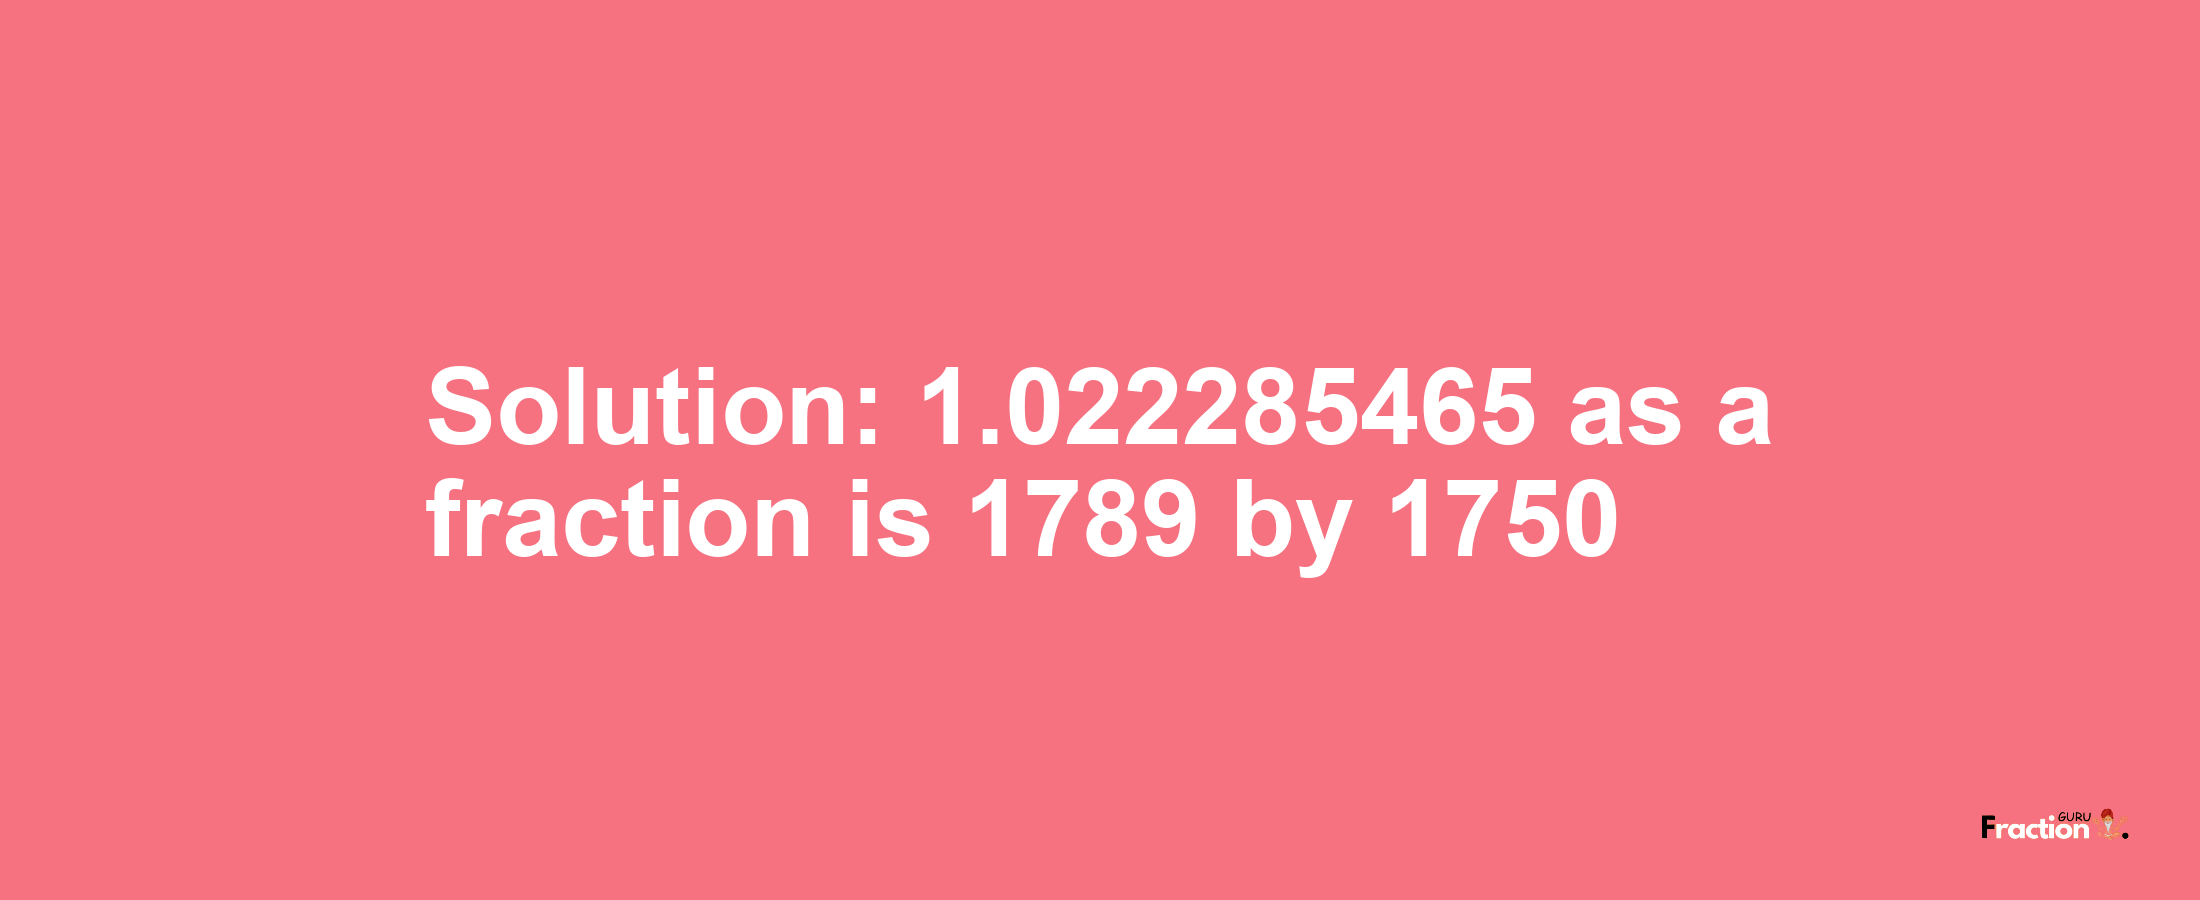 Solution:1.022285465 as a fraction is 1789/1750